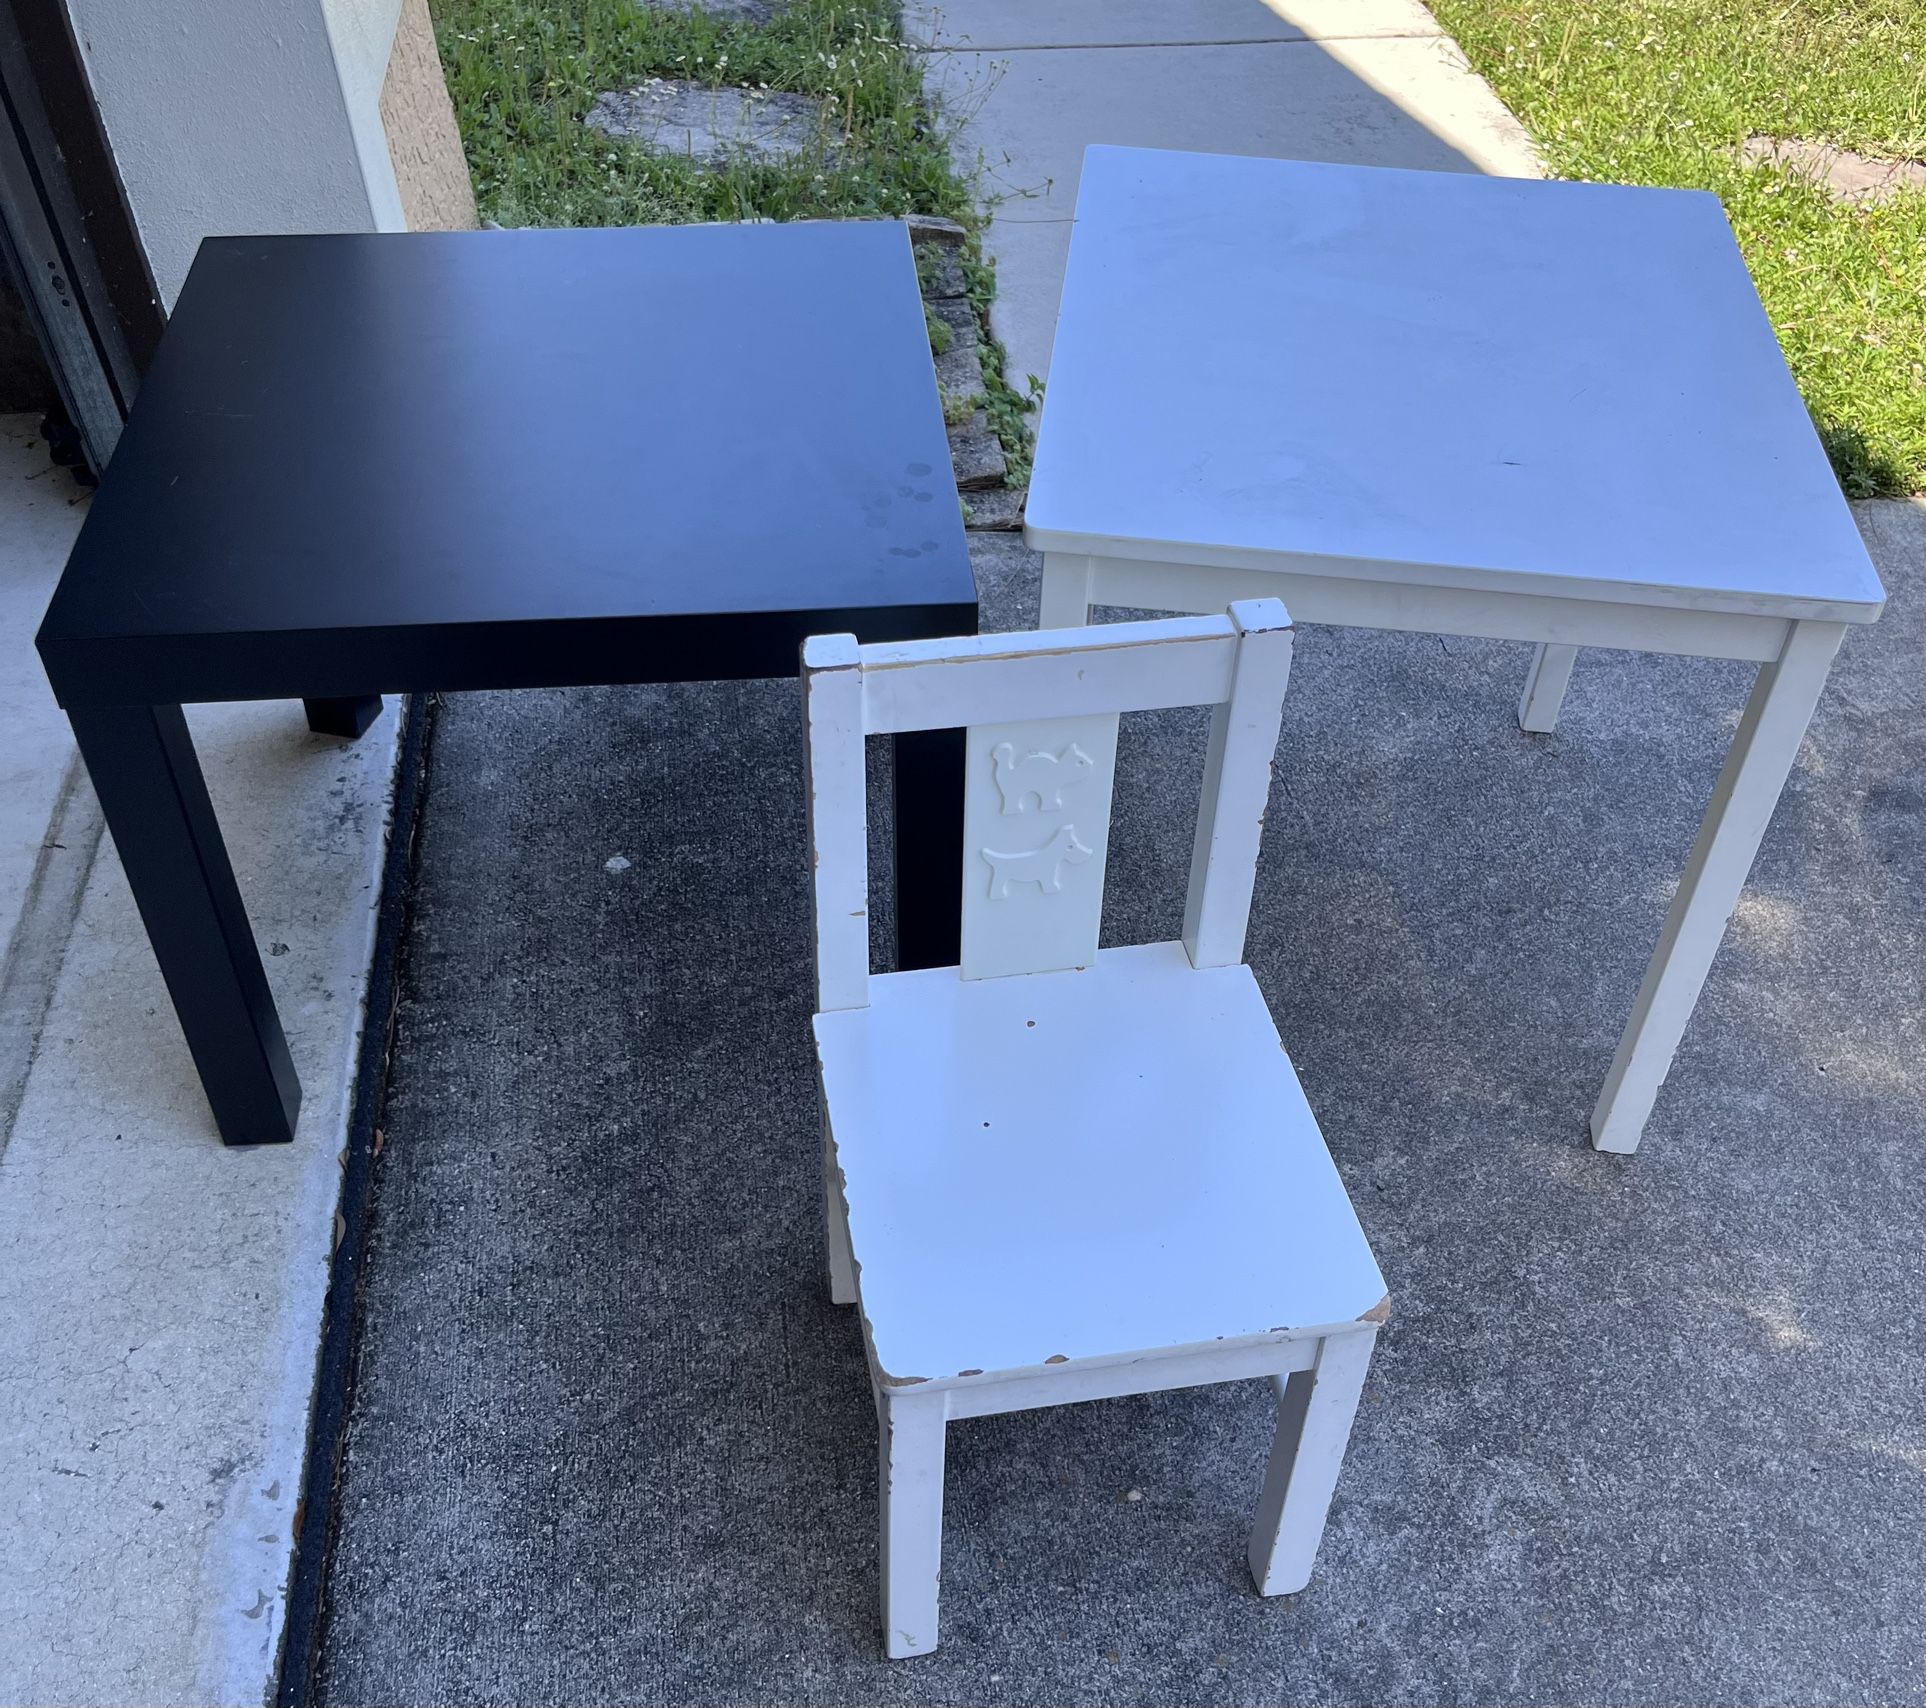 $20 for two small tables and kids chair